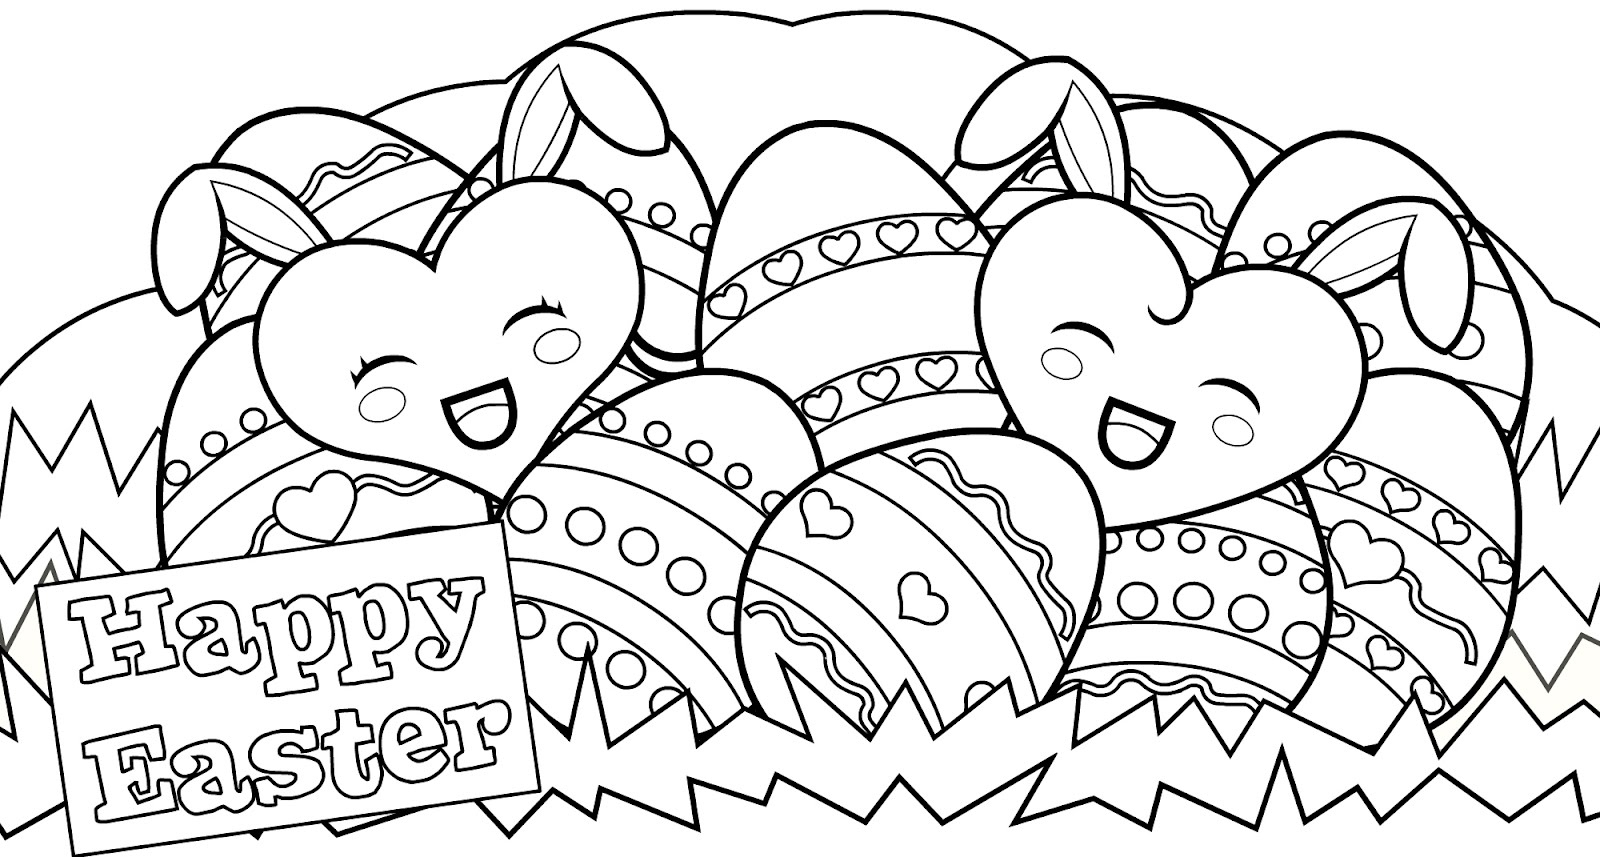 Printable Coloring Pages Easter - Childrenarepresent - Free Printable Easter Colouring Sheets